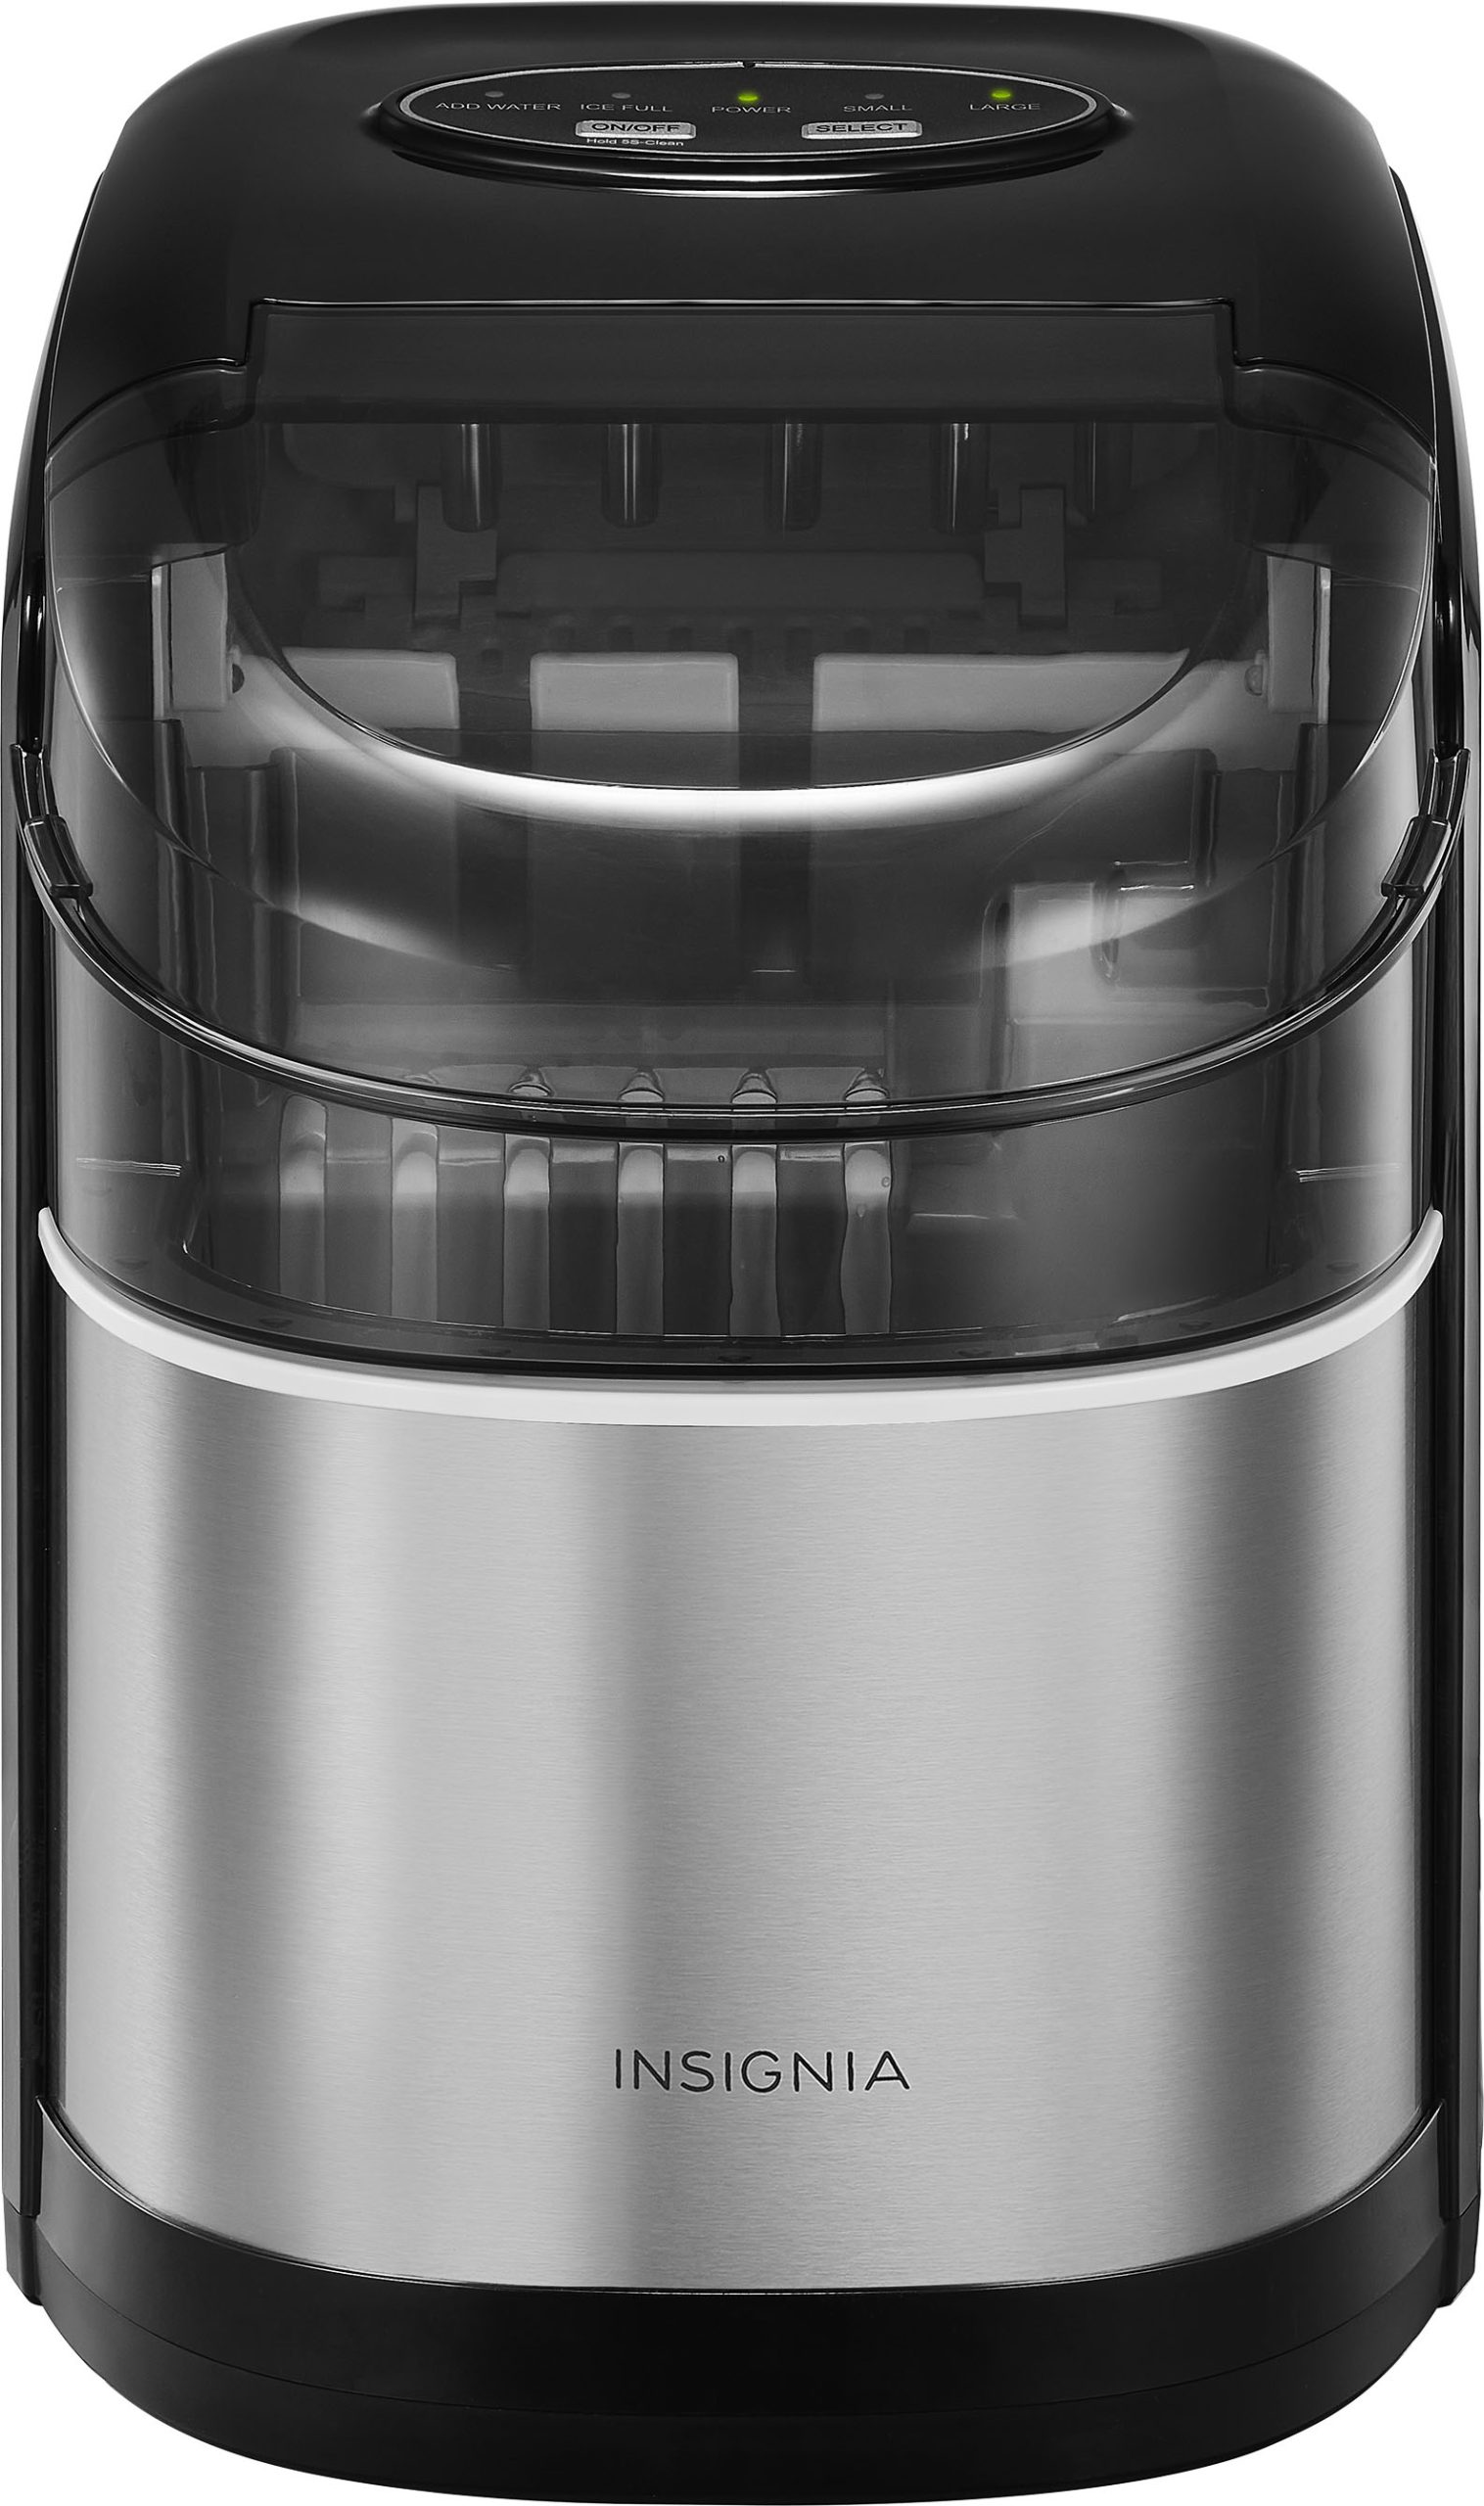 Insignia™ – Portable Icemaker 33 lb. With Auto Shut-Off – Stainless steel – Just $134.99 at Best Buy